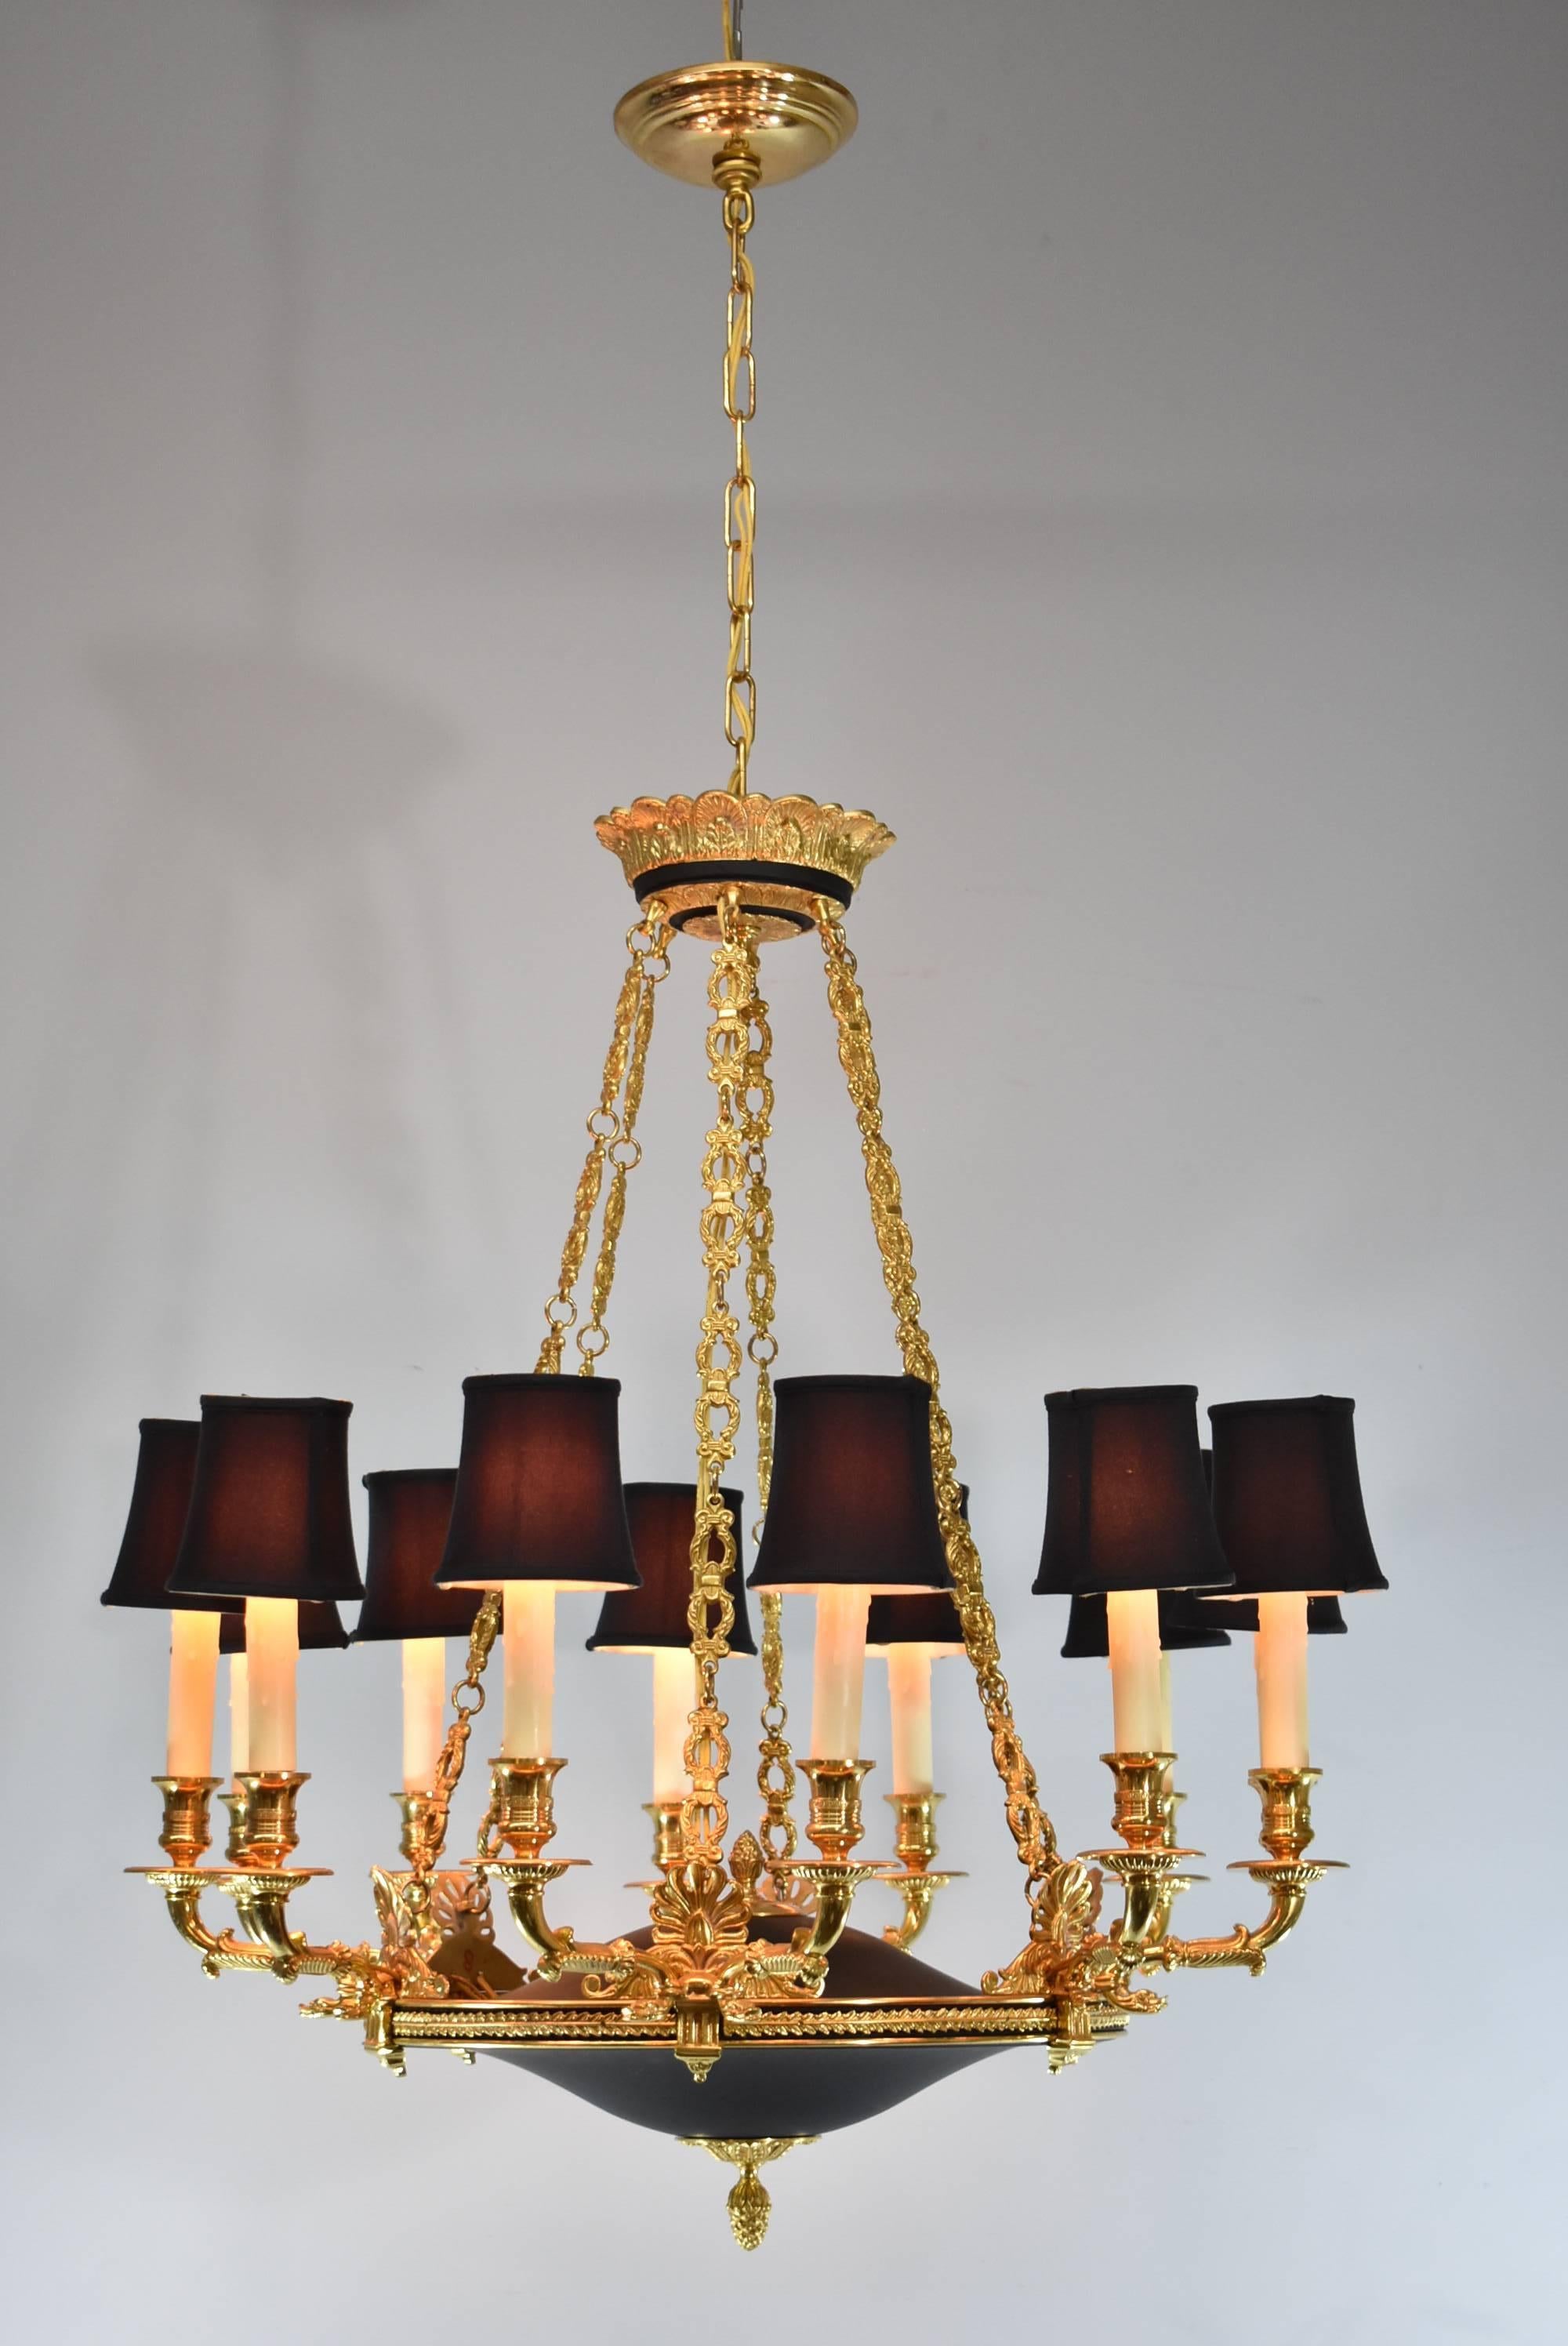 An elegant Italian 12 light bronze and black ebonized chandelier. This stunning light fixture features six chains that drape down from the center crown. In front of each chain there are double arms mounted with dolphin heads. It has a spun brass